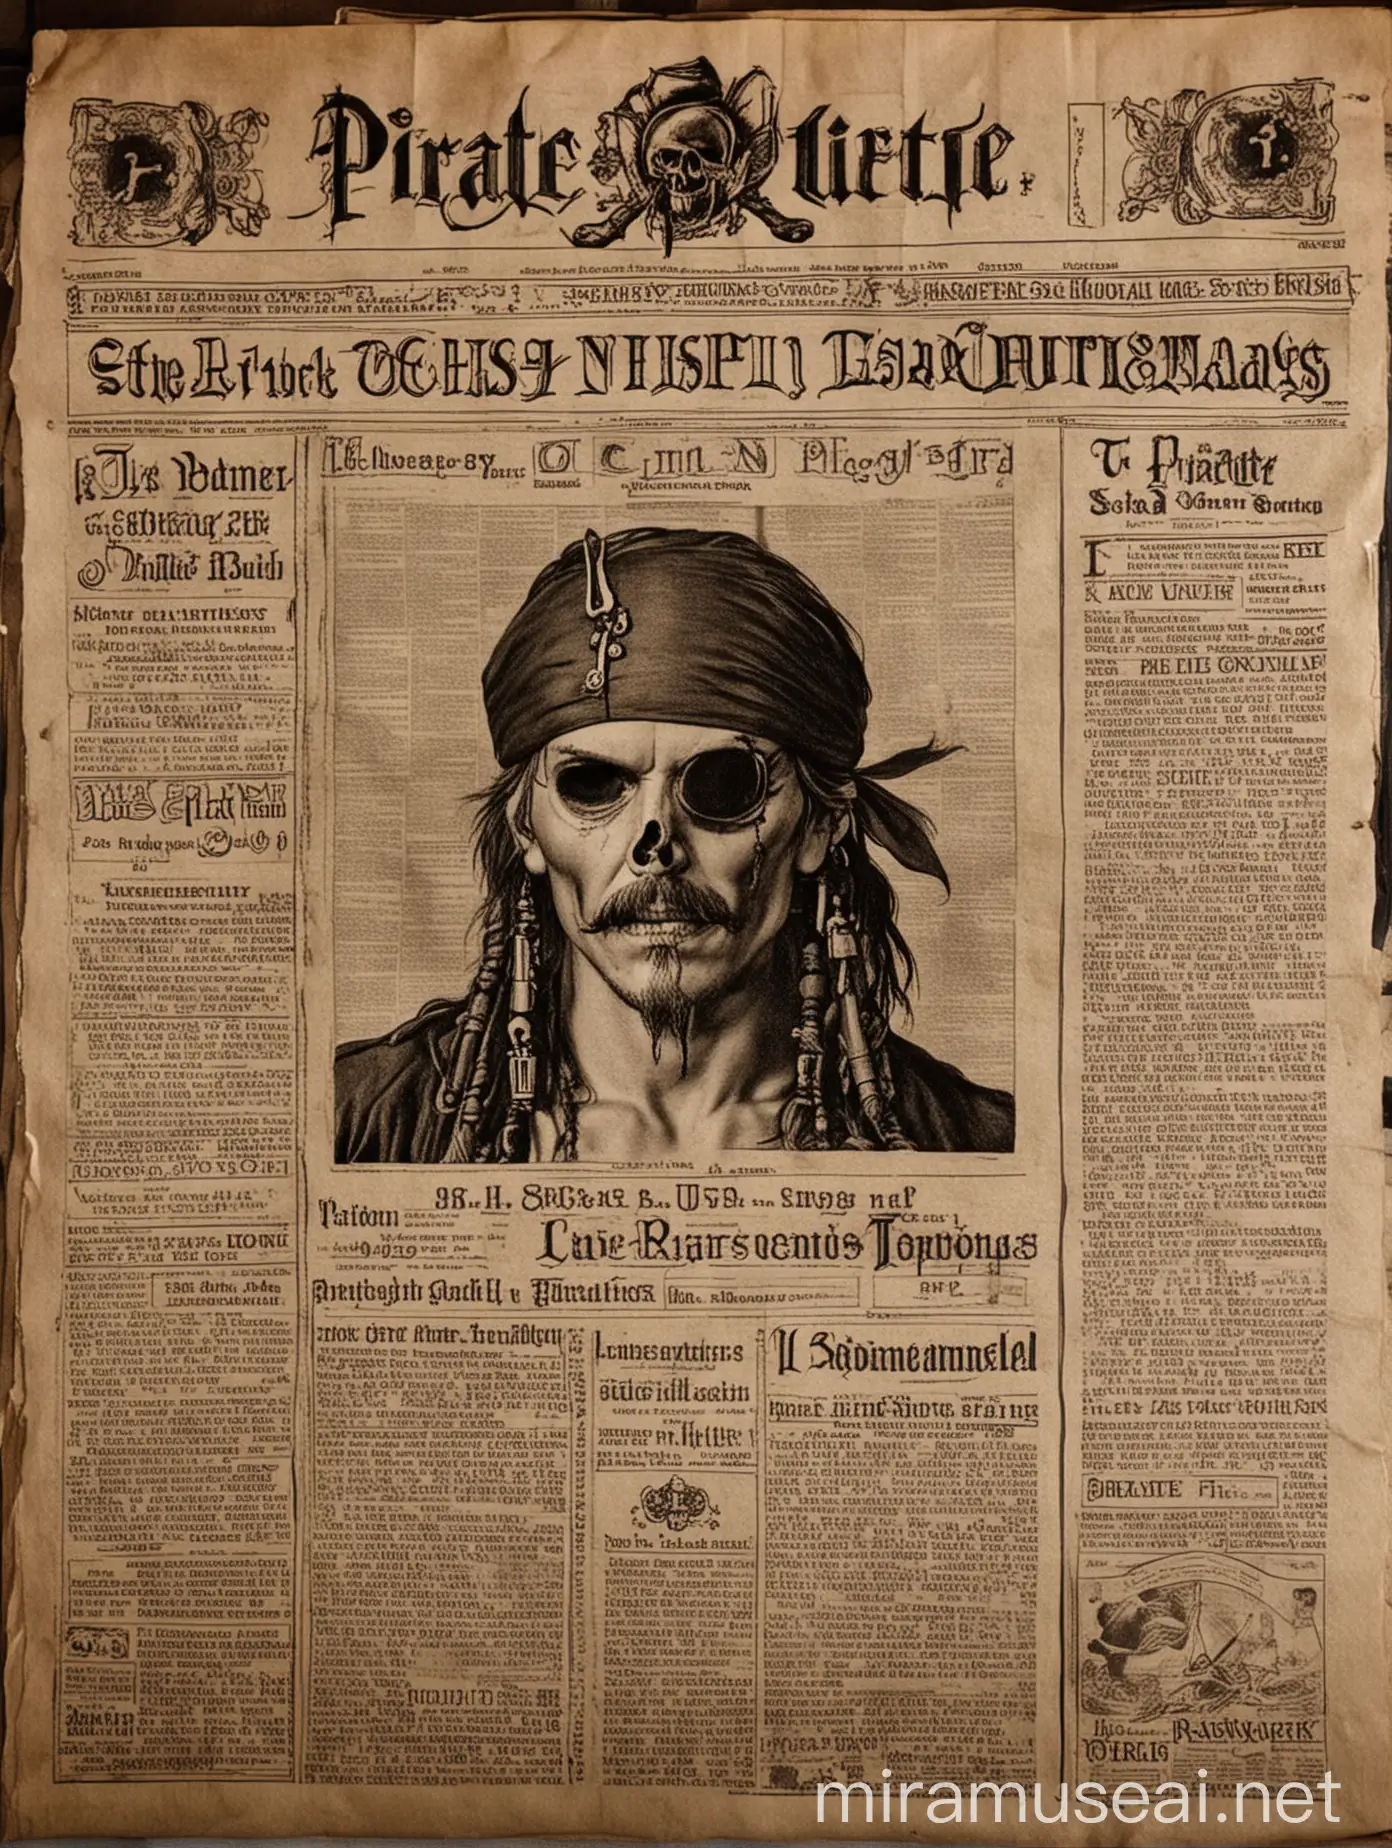 Pirate Reading the Latest News in a Vintage Newspaper